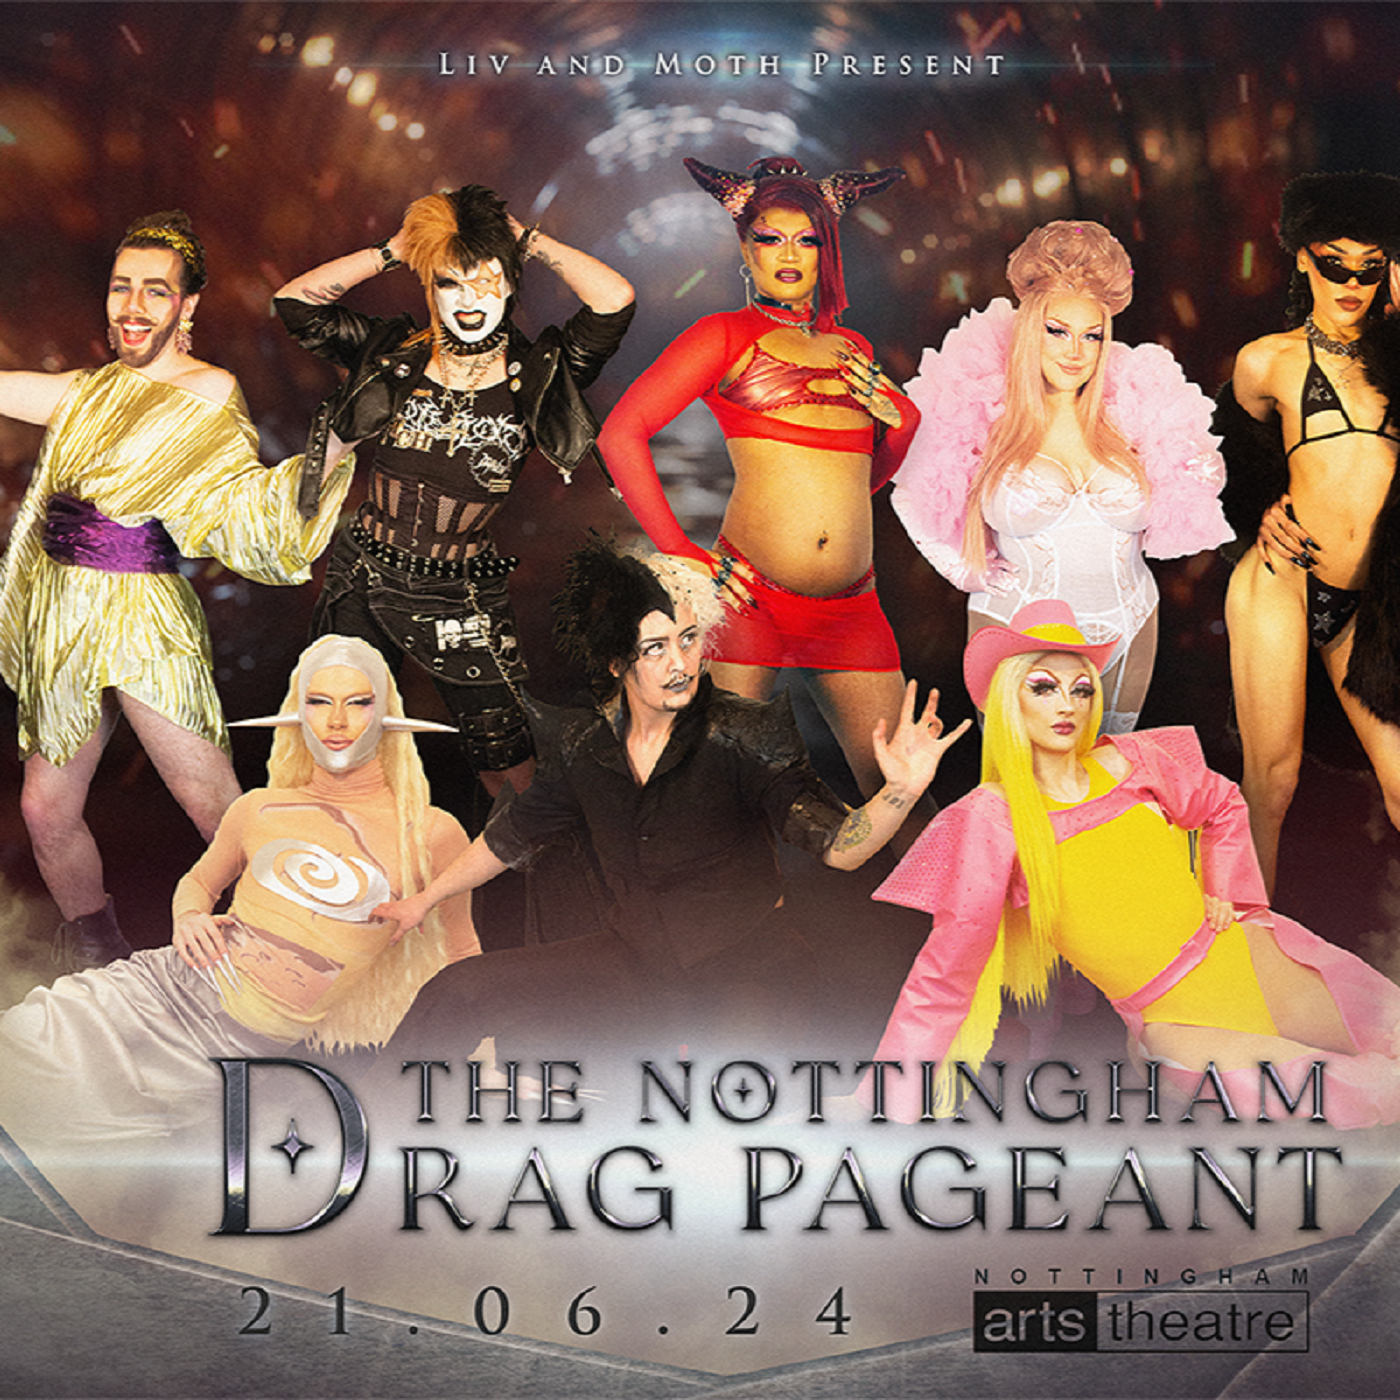 The Nottingham Drag Pageant